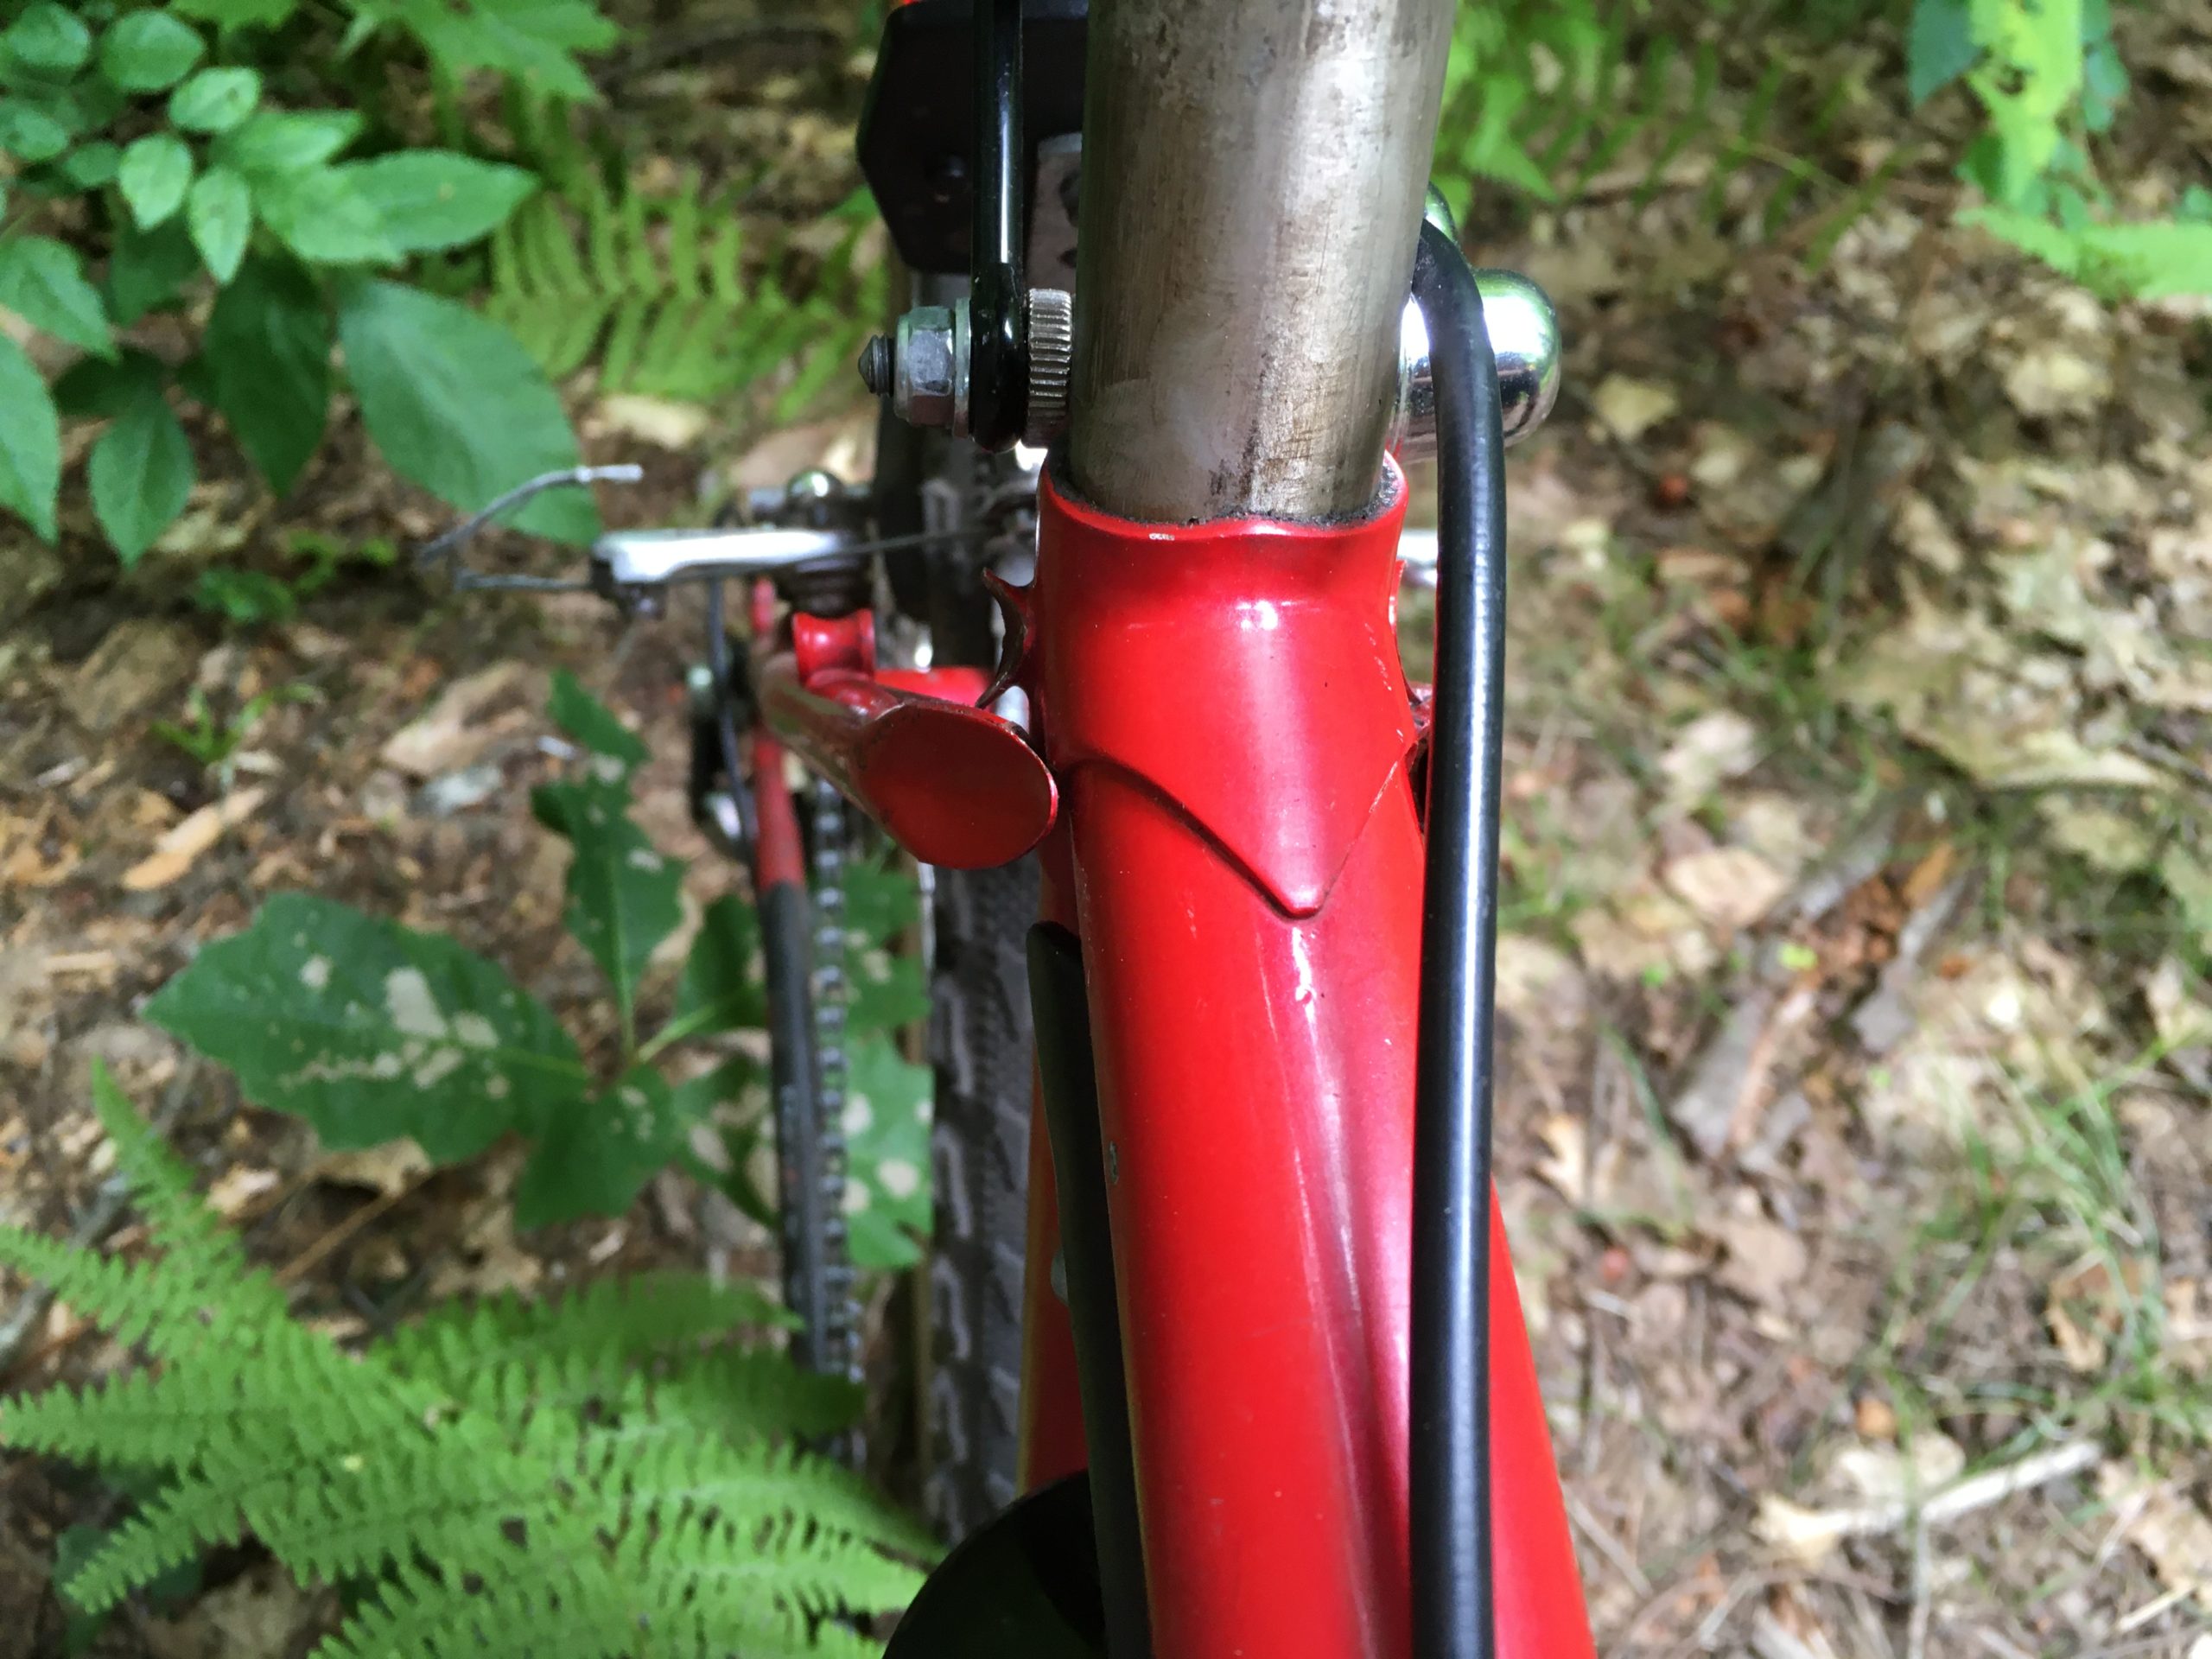 I Finally Took My Horrible Old Schwinn On Some Trails And It Instantly Exploded